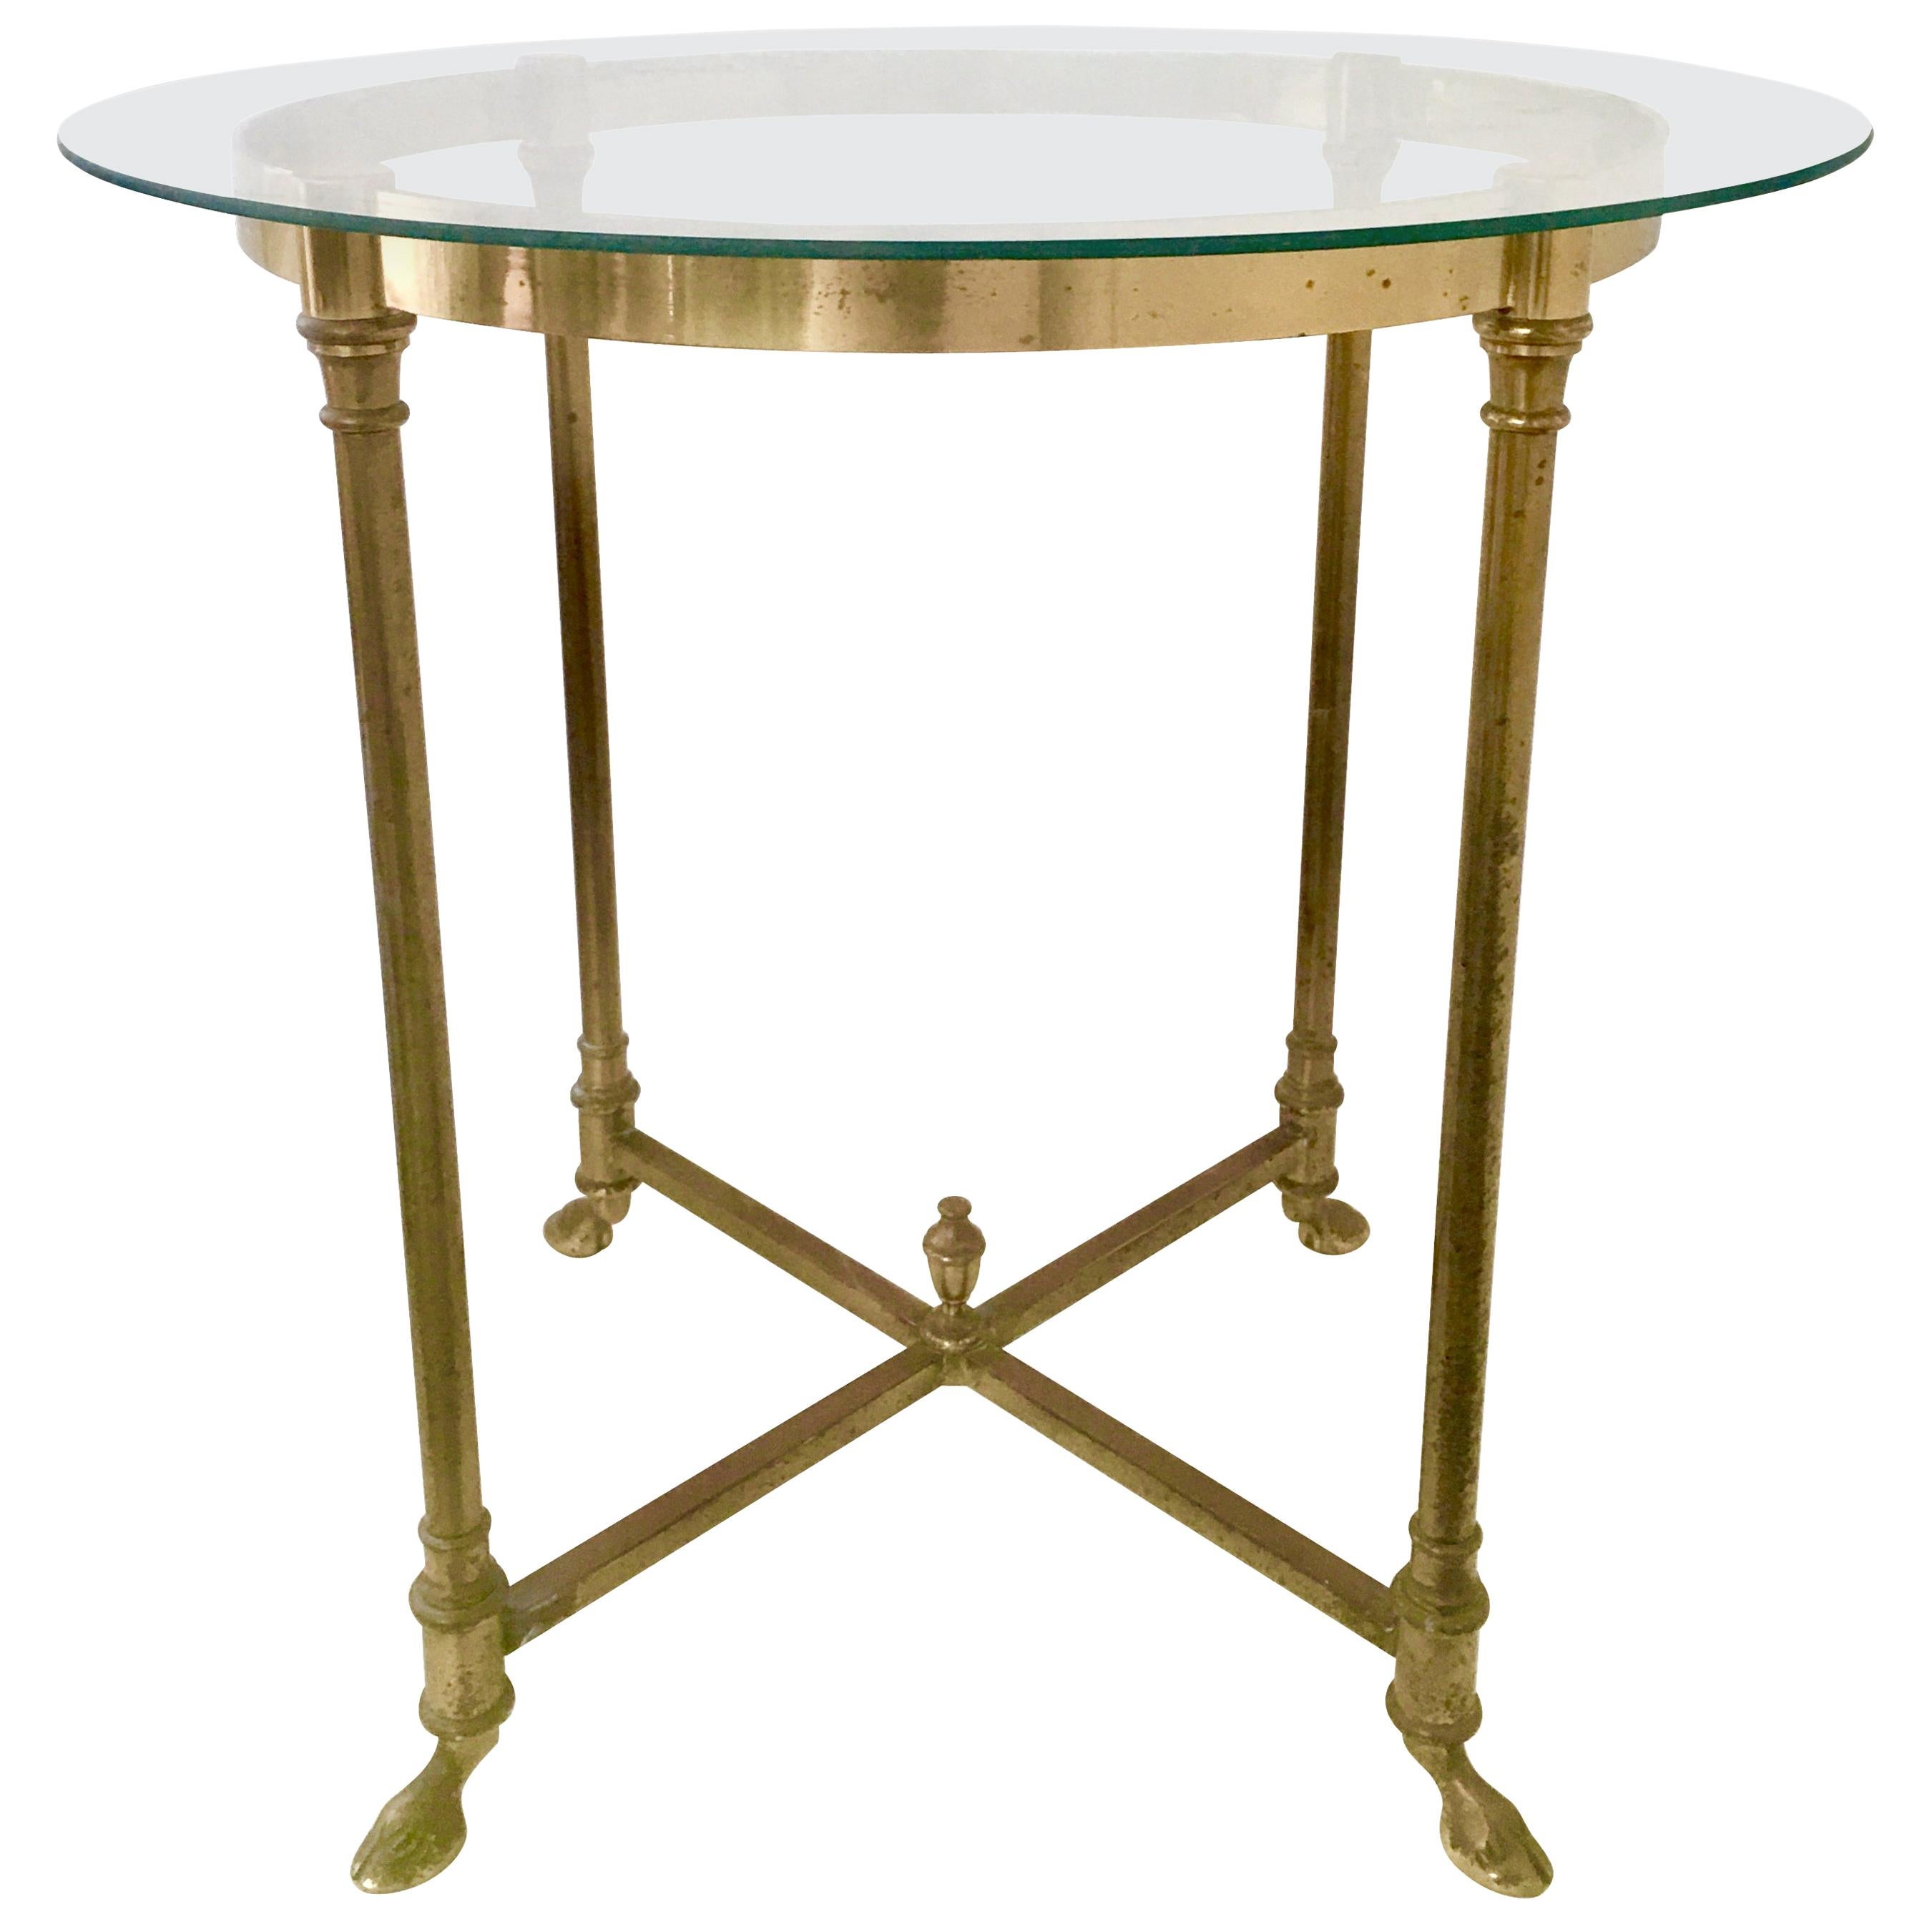 1960s Neoclassical Style Italian Brass and Glass Top "Hoof" Table